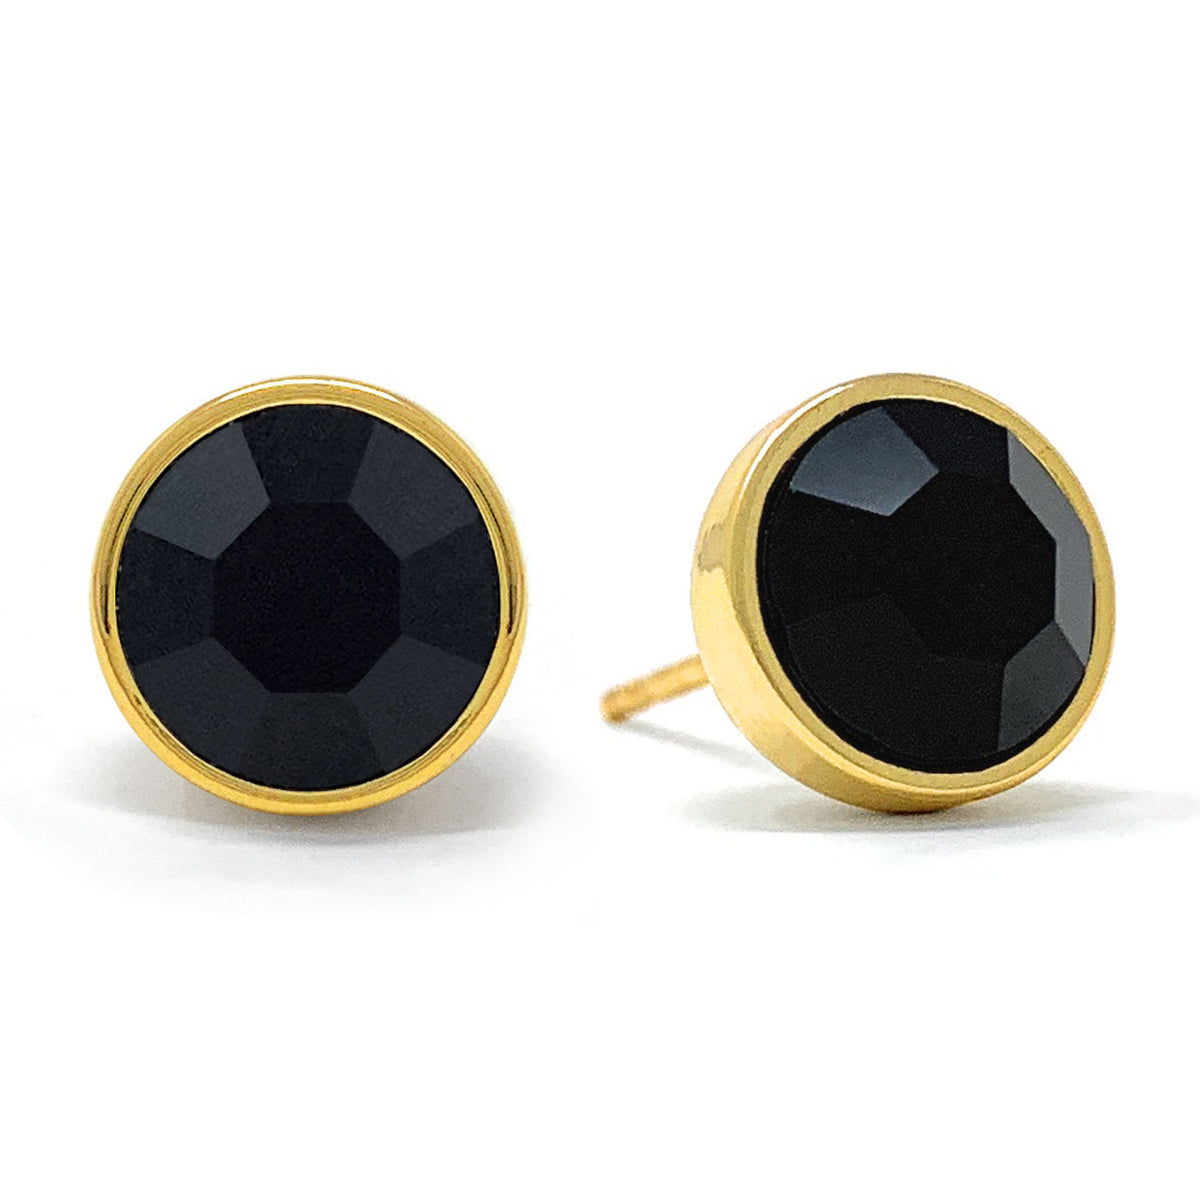 Harley Stud Earrings with Black Jet Round Crystals from Swarovski Gold Plated - Ed Heart